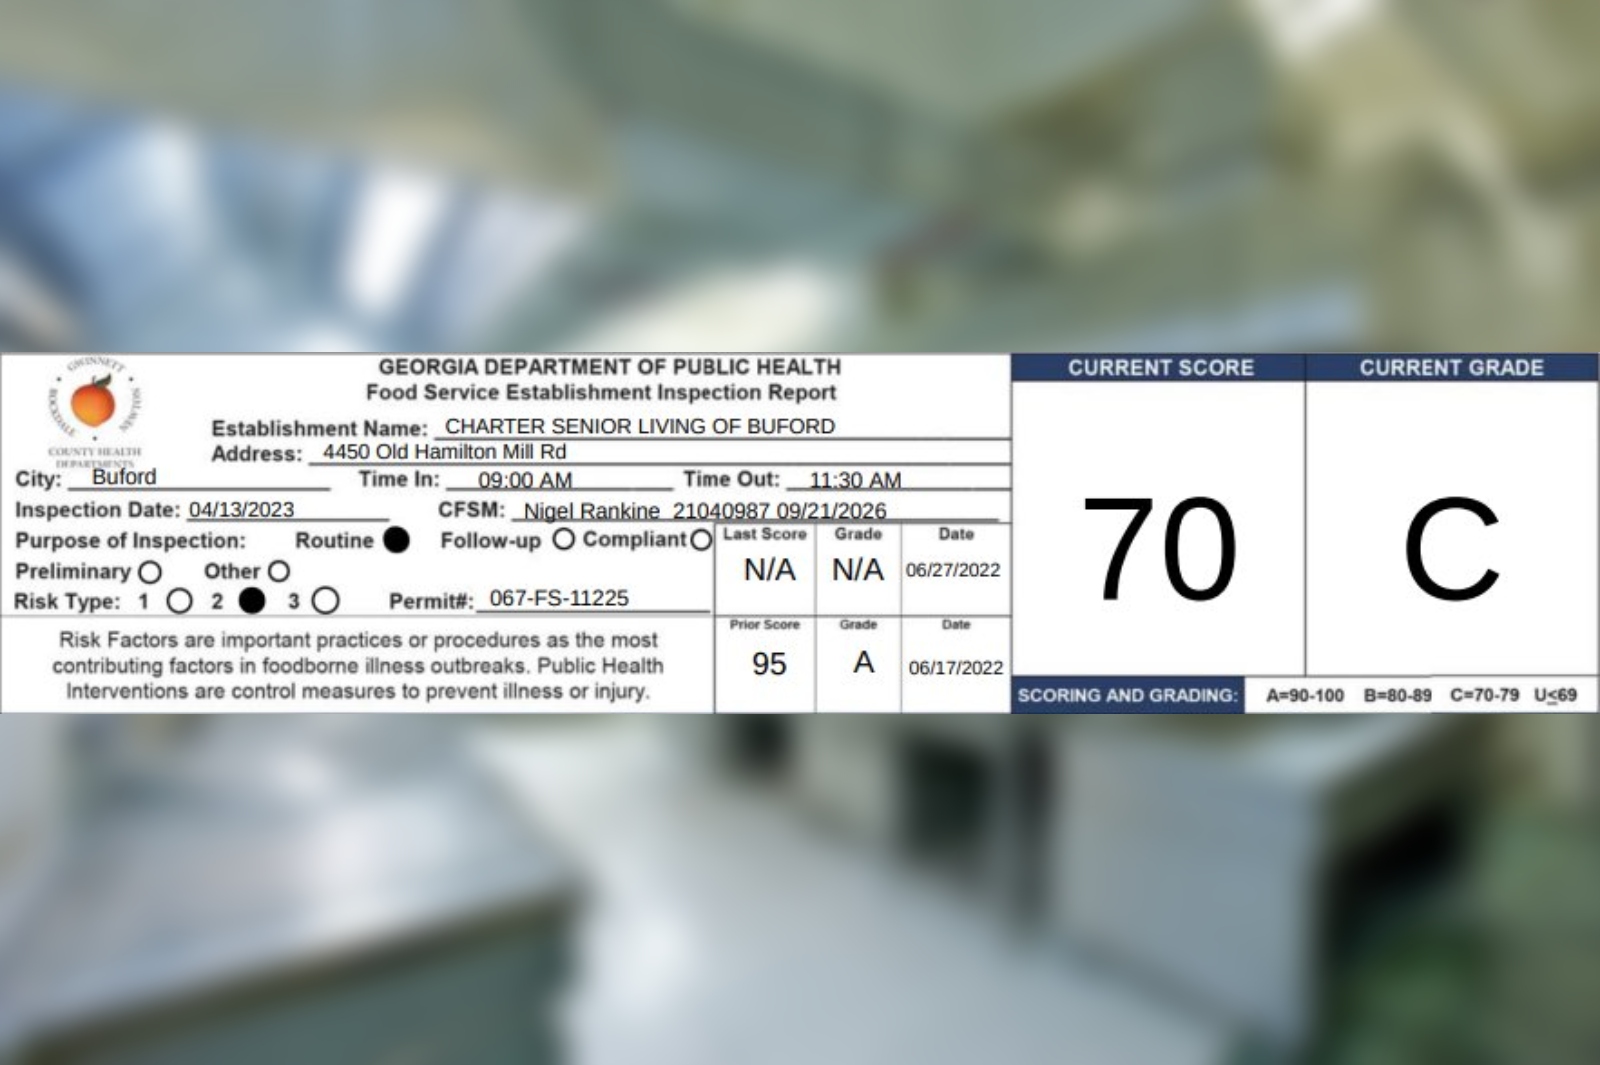 Charter Senior Living In Buford Receives A 70 On Their Recent Health